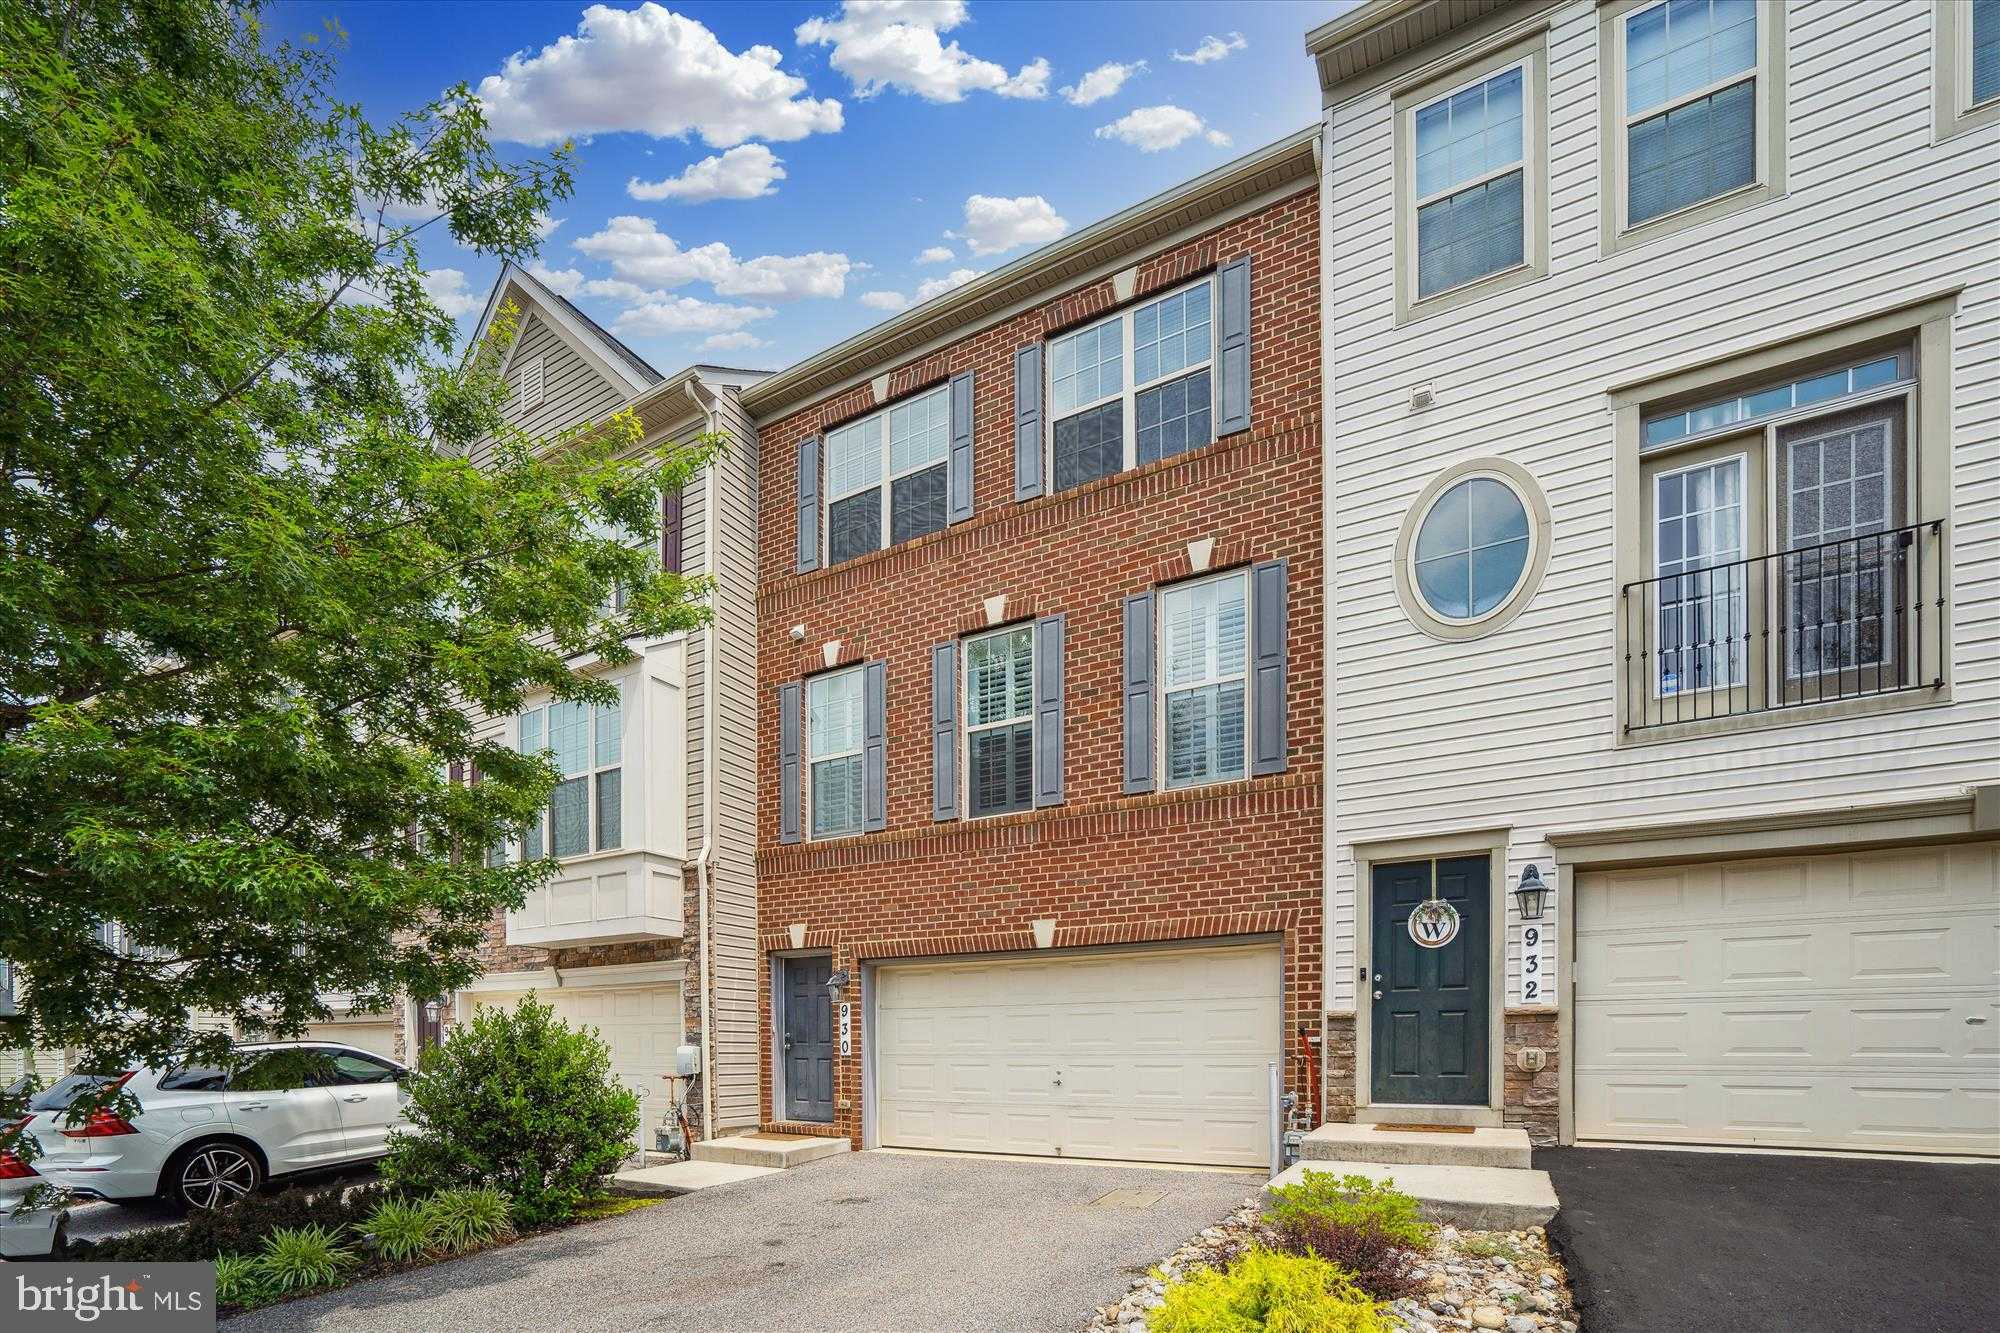 View ARNOLD, MD 21012 townhome